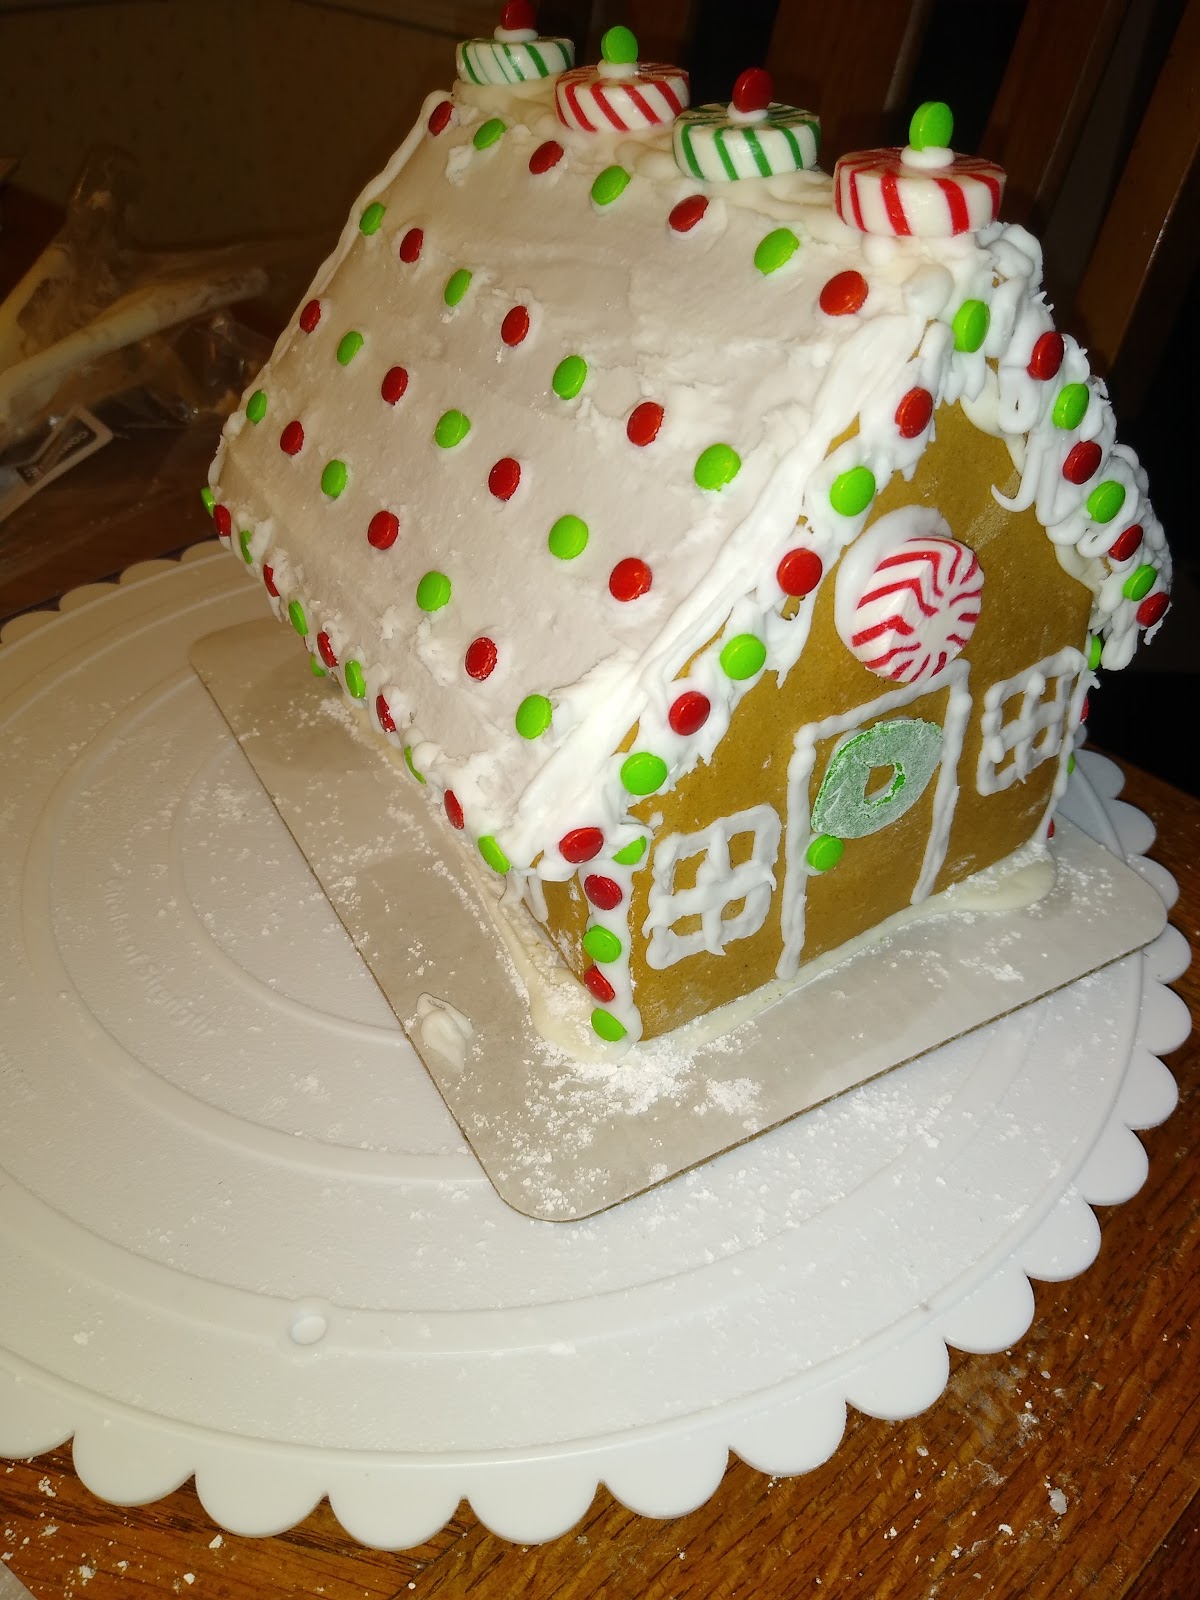 decorated gingerbread house